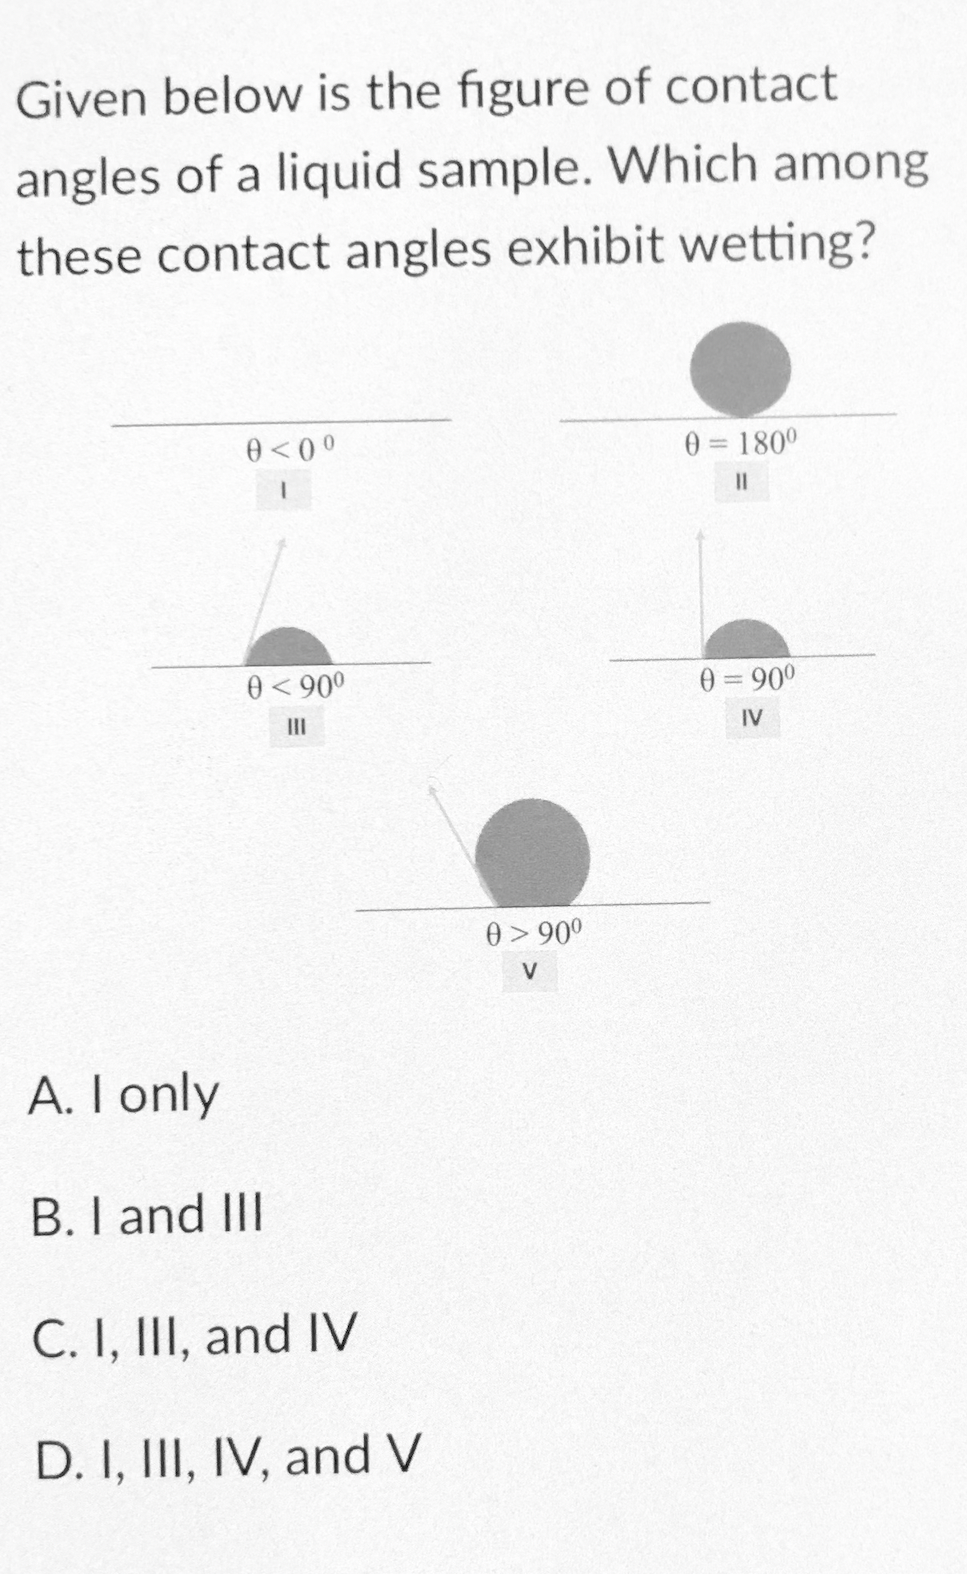 Given below is the figure of contact
angles of a liquid sample. Which among
these contact angles exhibit wetting?
0<00
0 180°
I3I
0< 900
0 = 900
II
IV
0> 90°
V
A. I only
B. I and III
C. I, III, and IV
D. I, III, IV, and V
